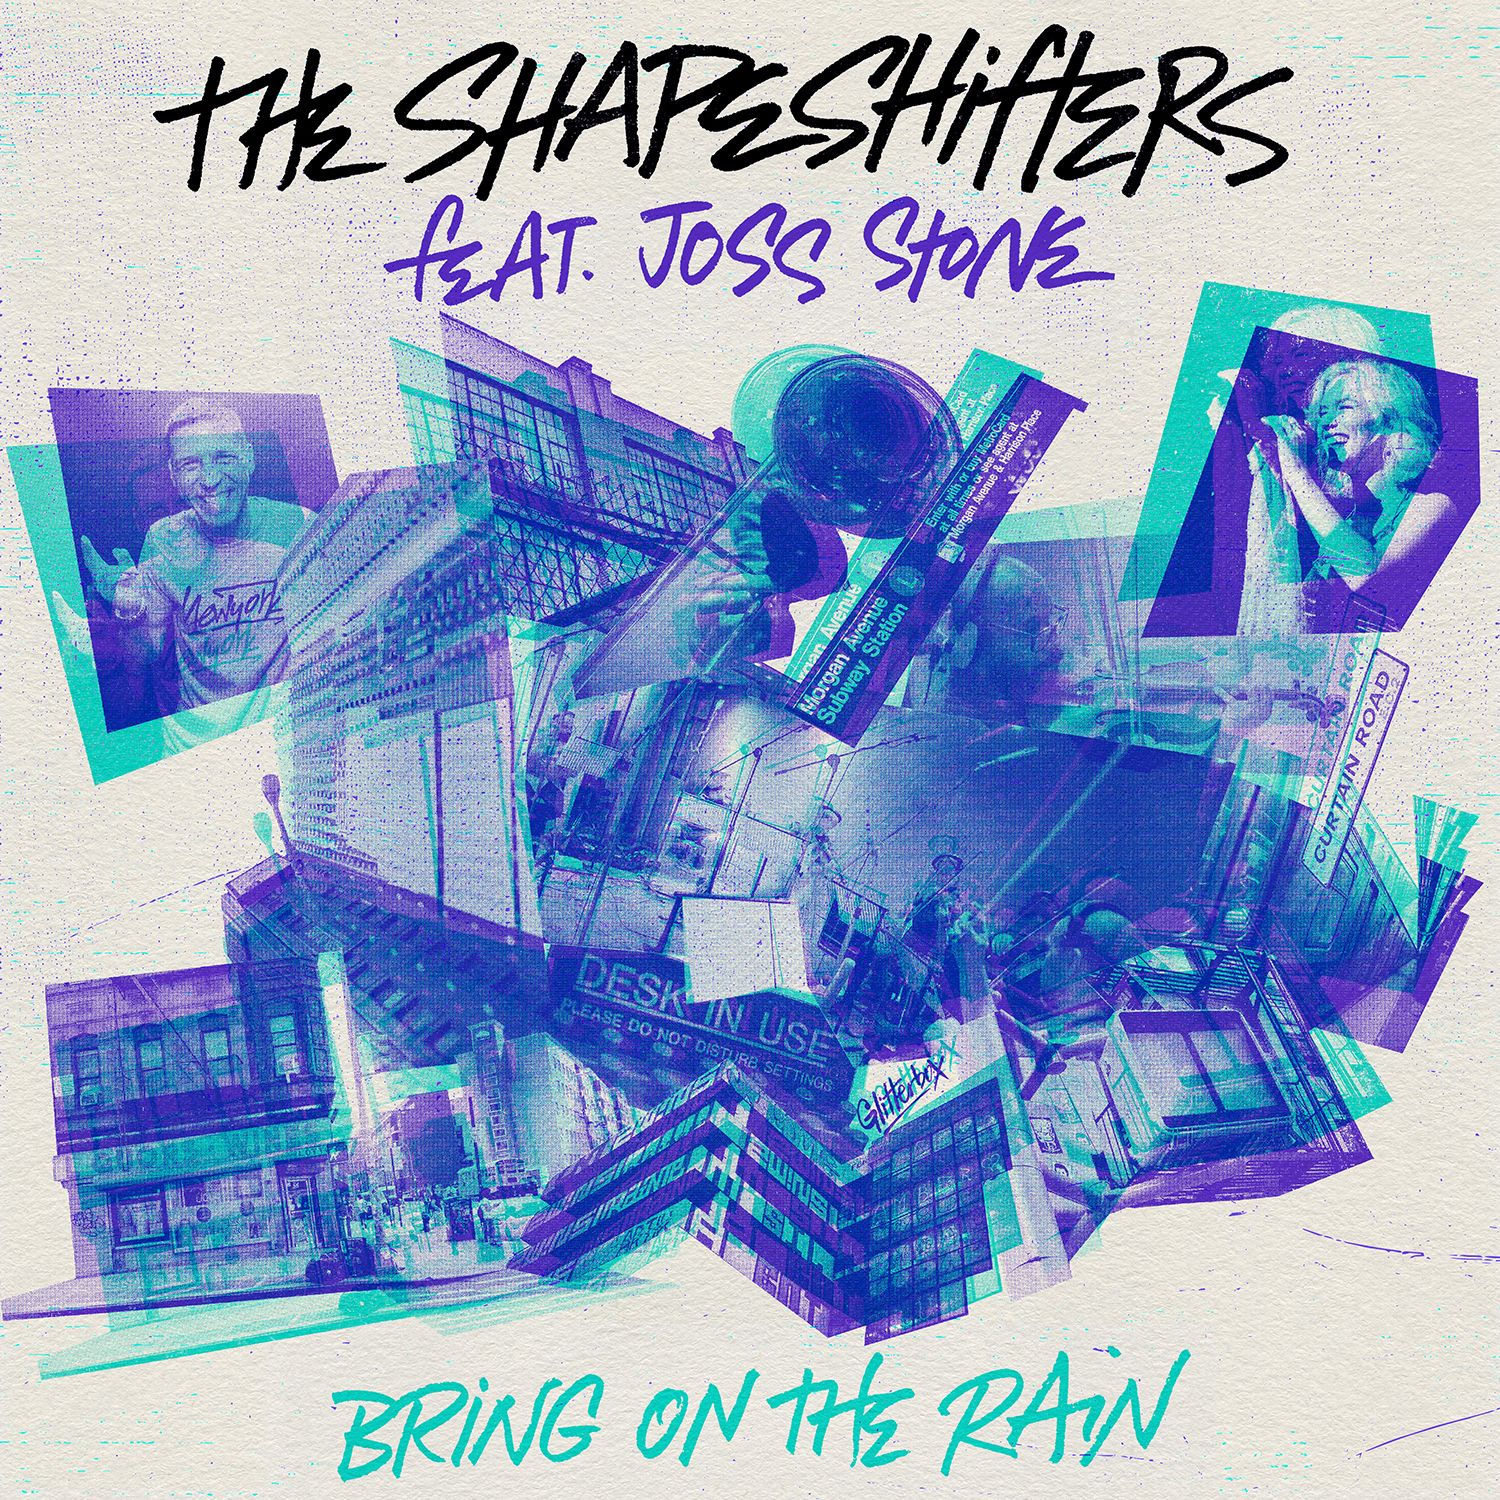 The Shapeshifters featuring Joss Stone 'Bring On The Rain' - Out 01.04